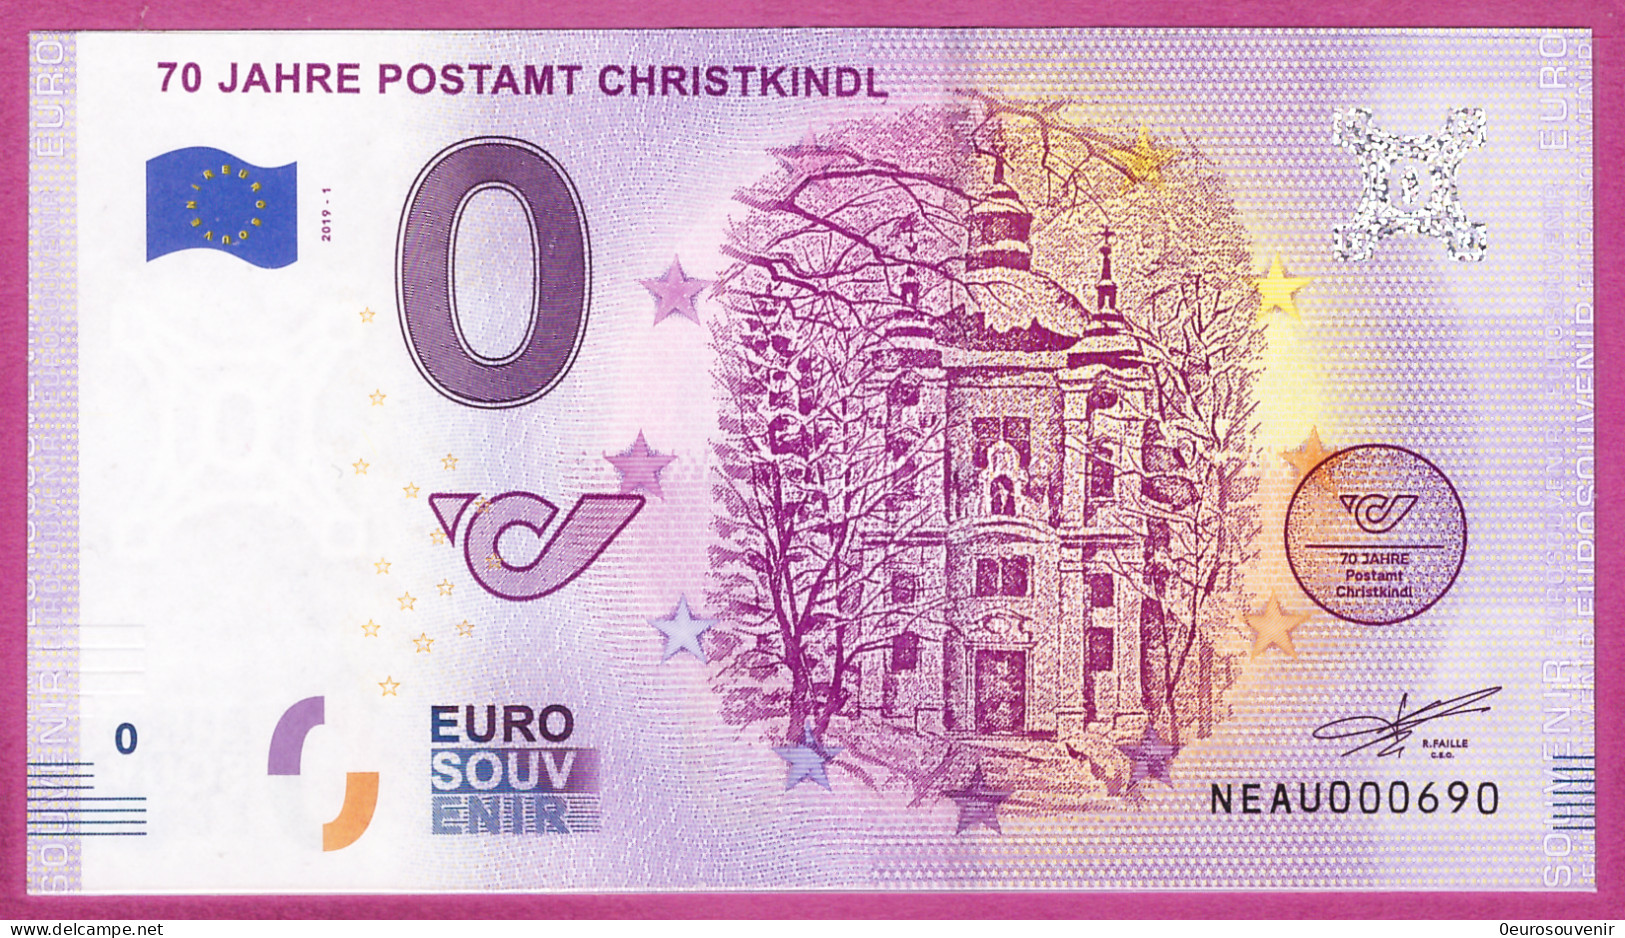 0-Euro NEAU 2019-1 70 JAHRE POSTAMT CHRISTKINDL - Private Proofs / Unofficial